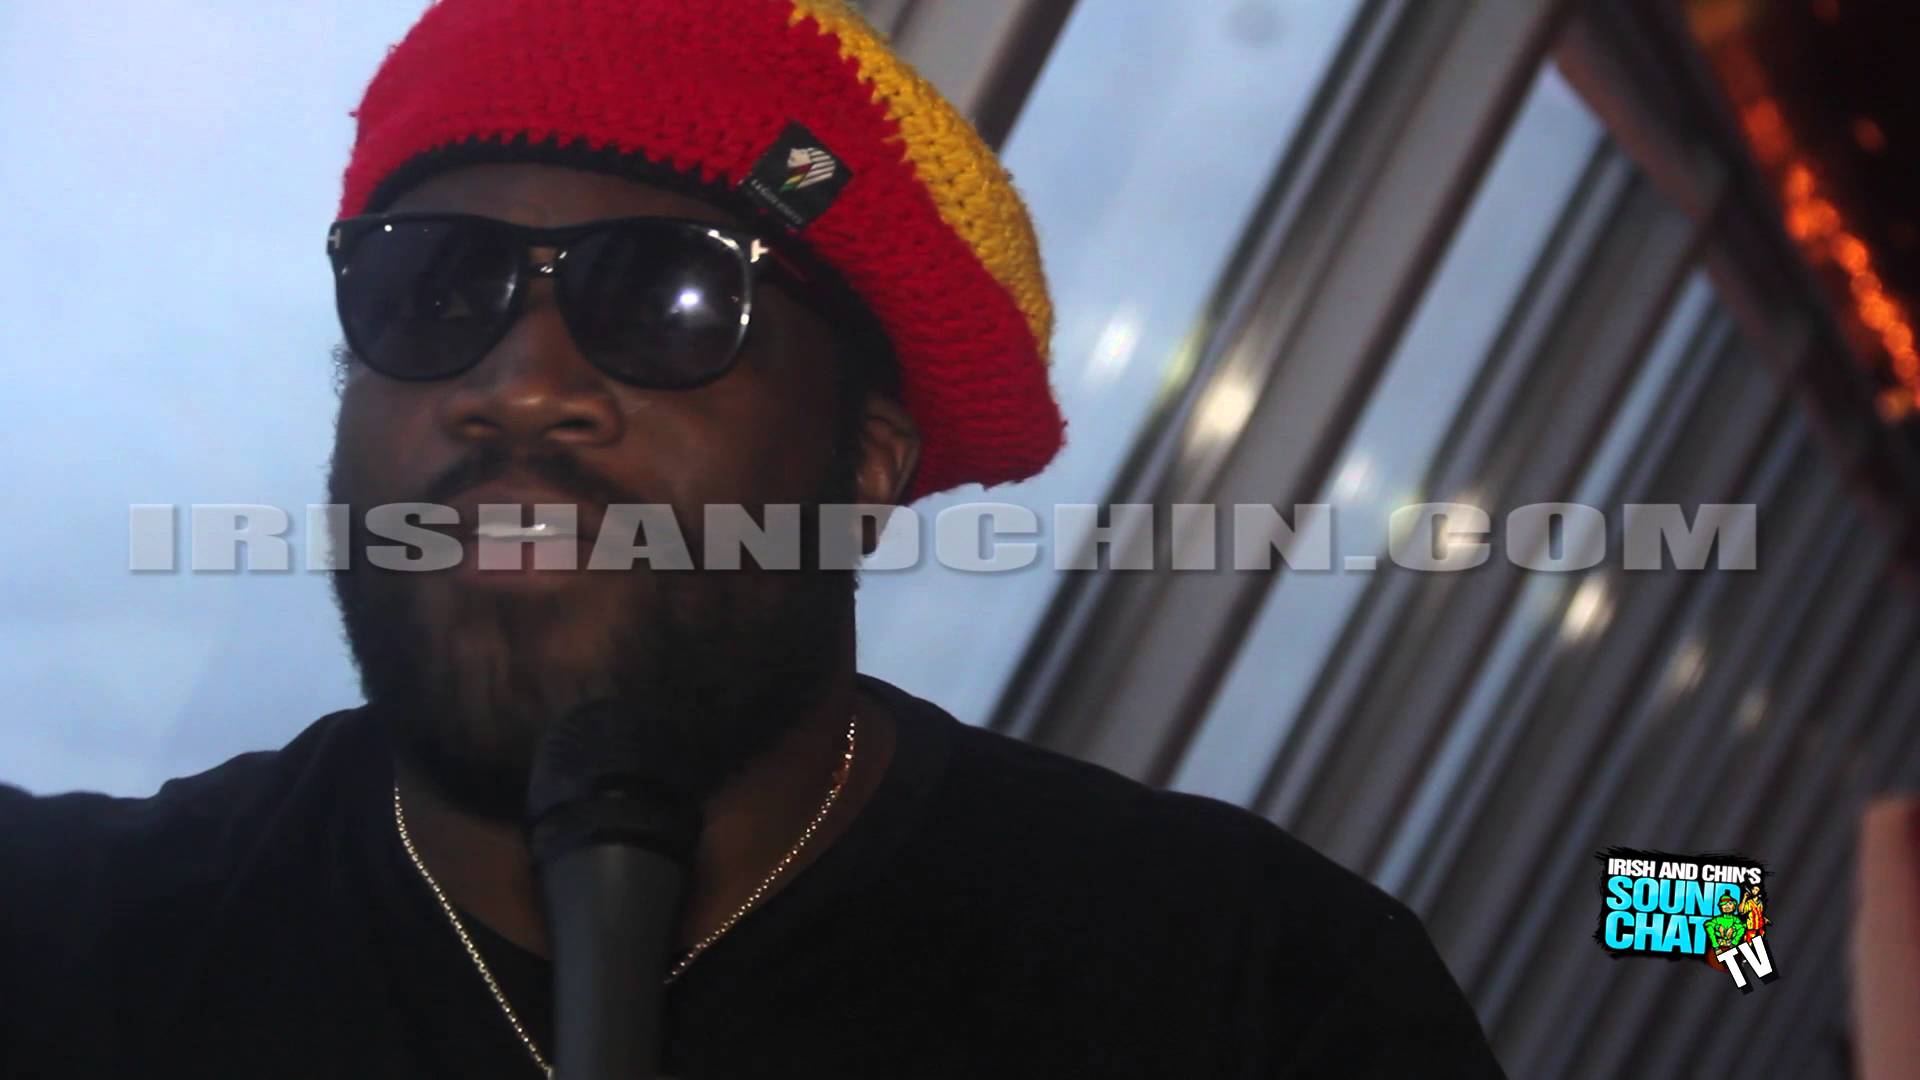 Interview with Gramps Morgan by Irish & Chin [12/5/2015]